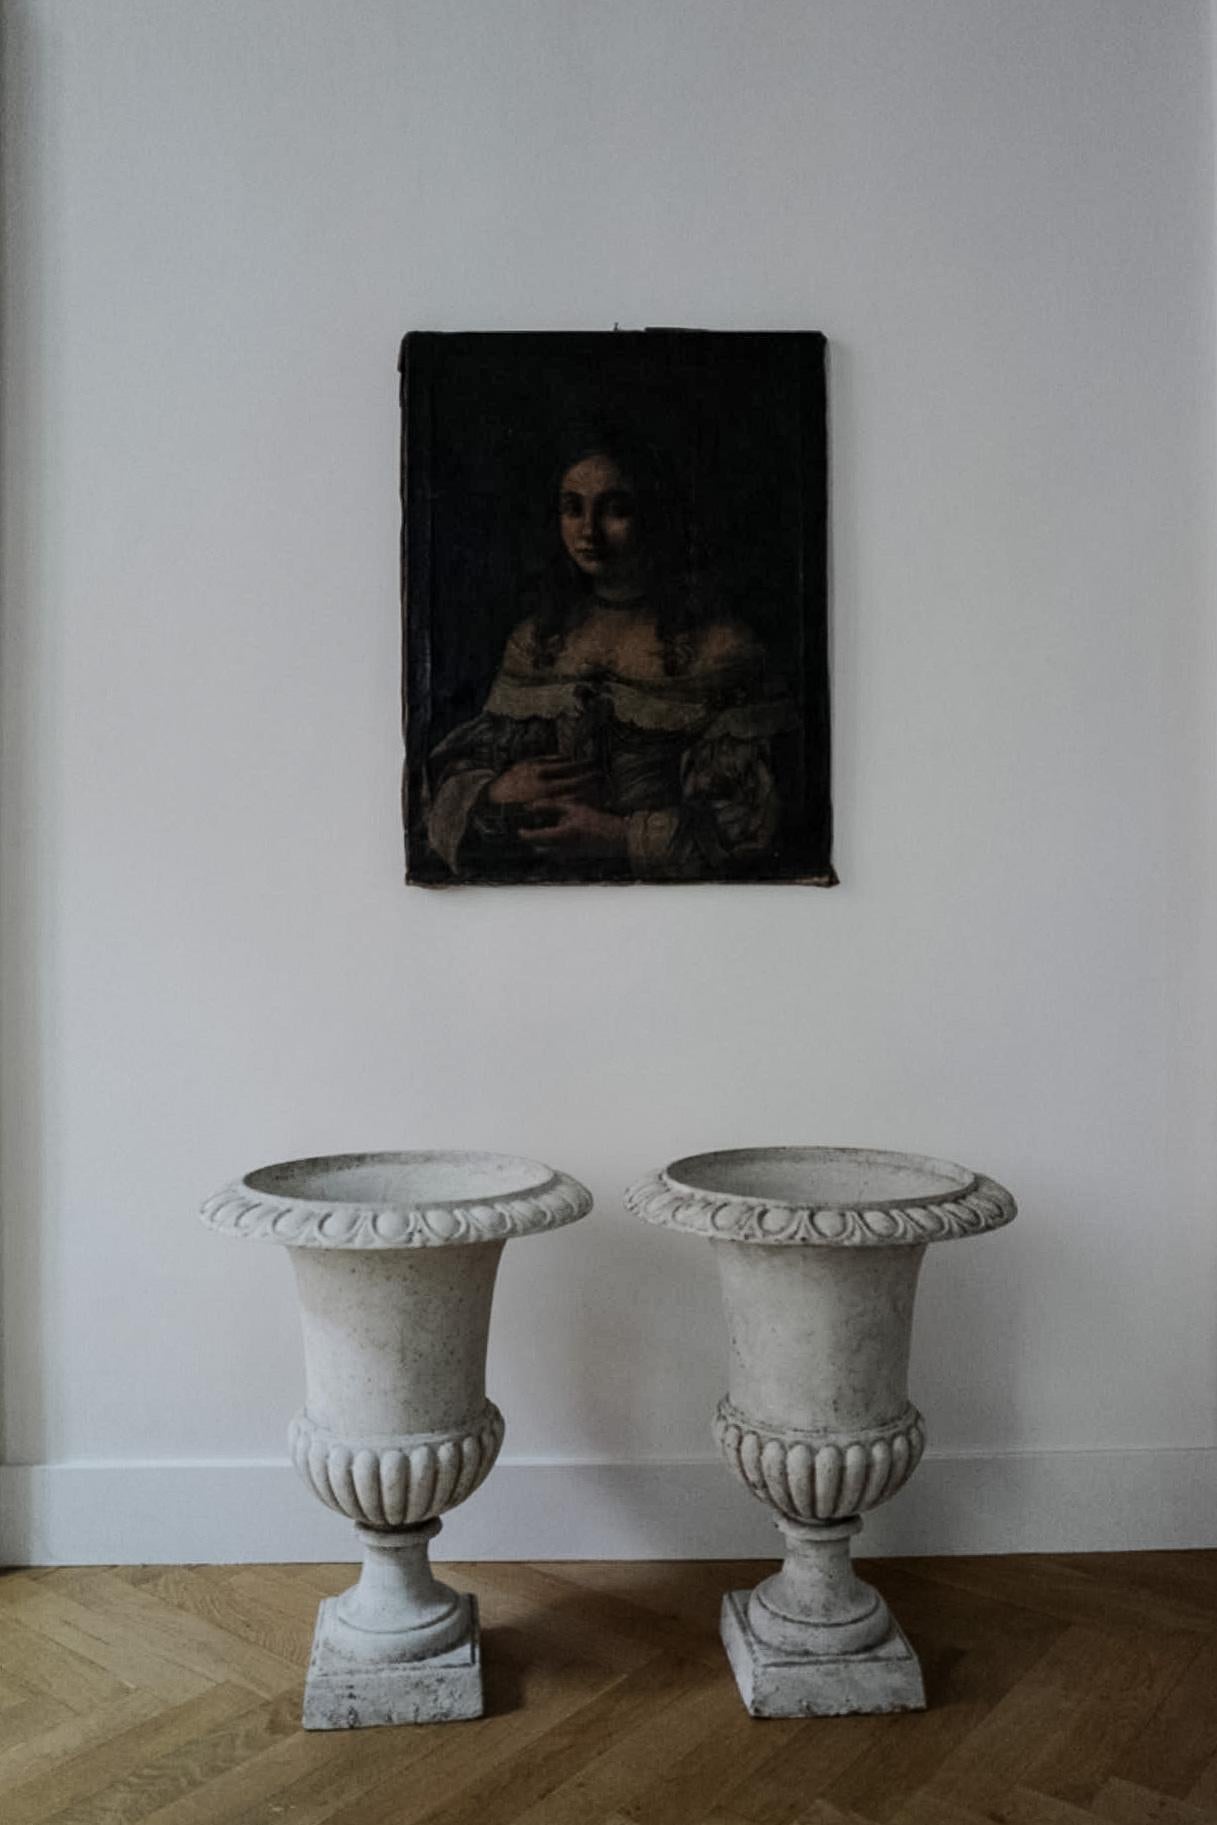 A pair of large neoclassical 19th century iron garden urns painted white.